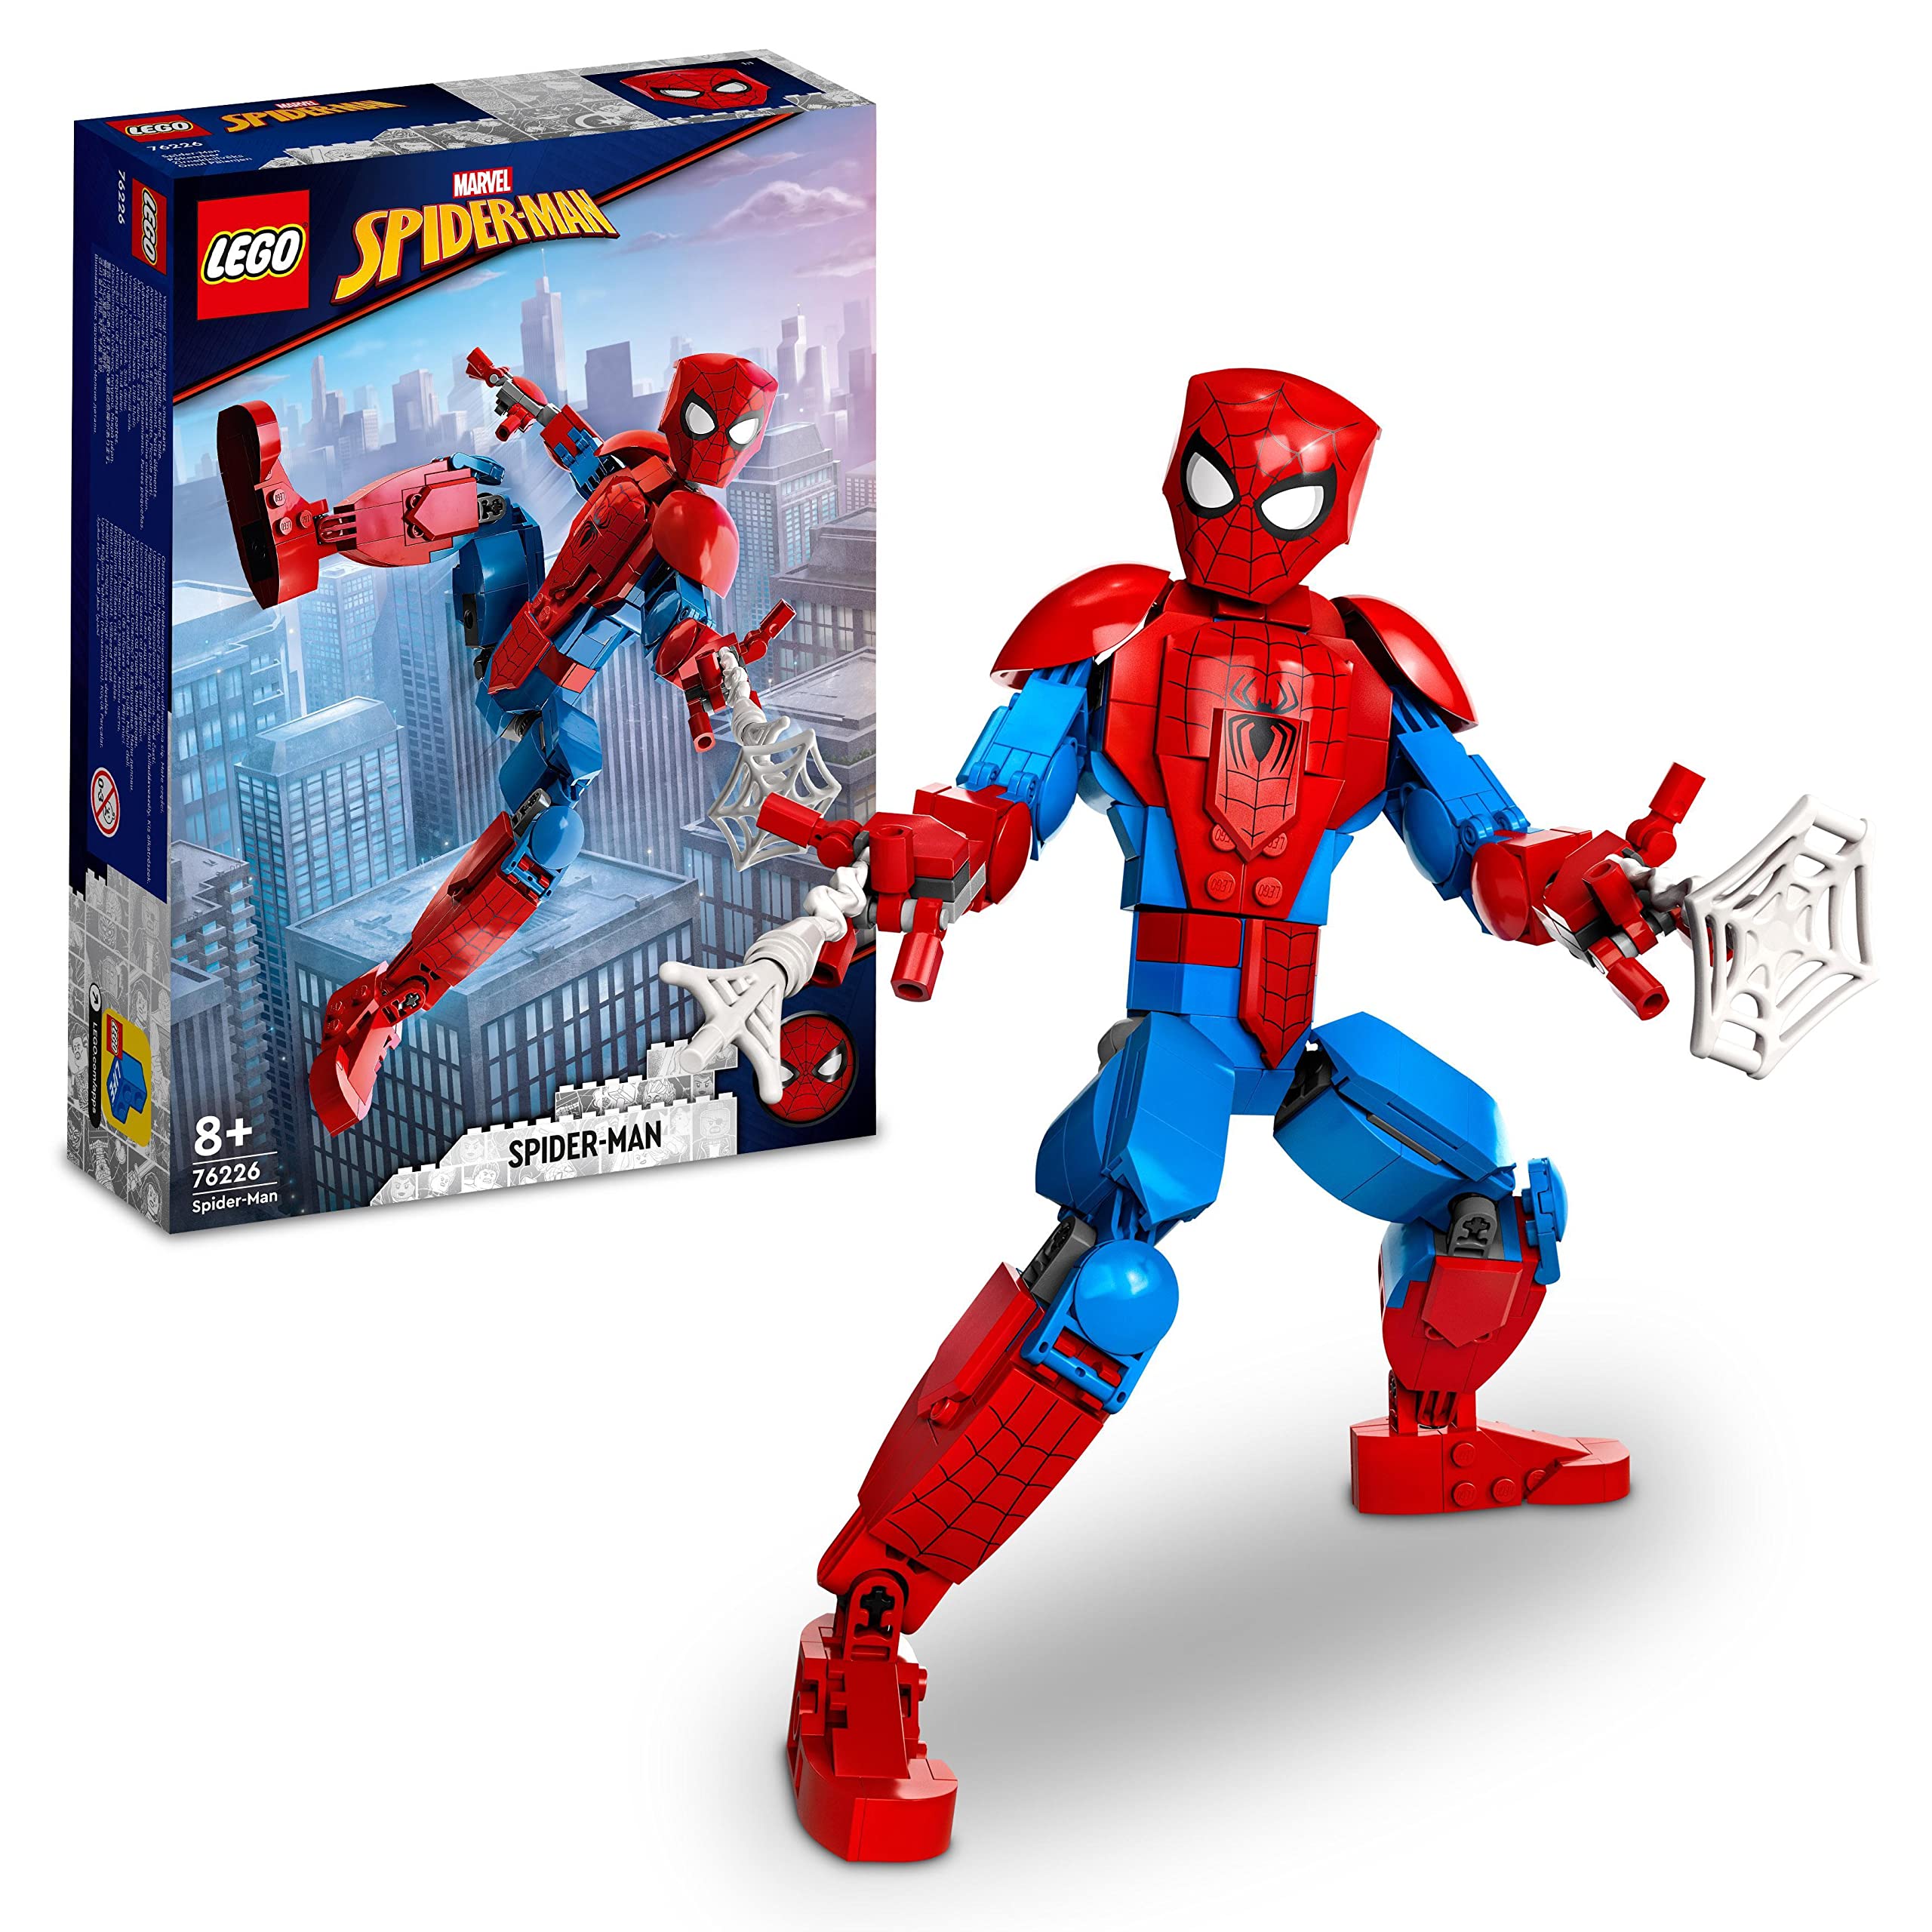 Mua LEGO 76226 Marvel Spider-Man Figure, Fully Articulated Action Toy,  Super Hero Movie Set with Web Elements, Collectible Model, Toys for Boys  and Girls trên Amazon Anh chính hãng 2023 | Giaonhan247